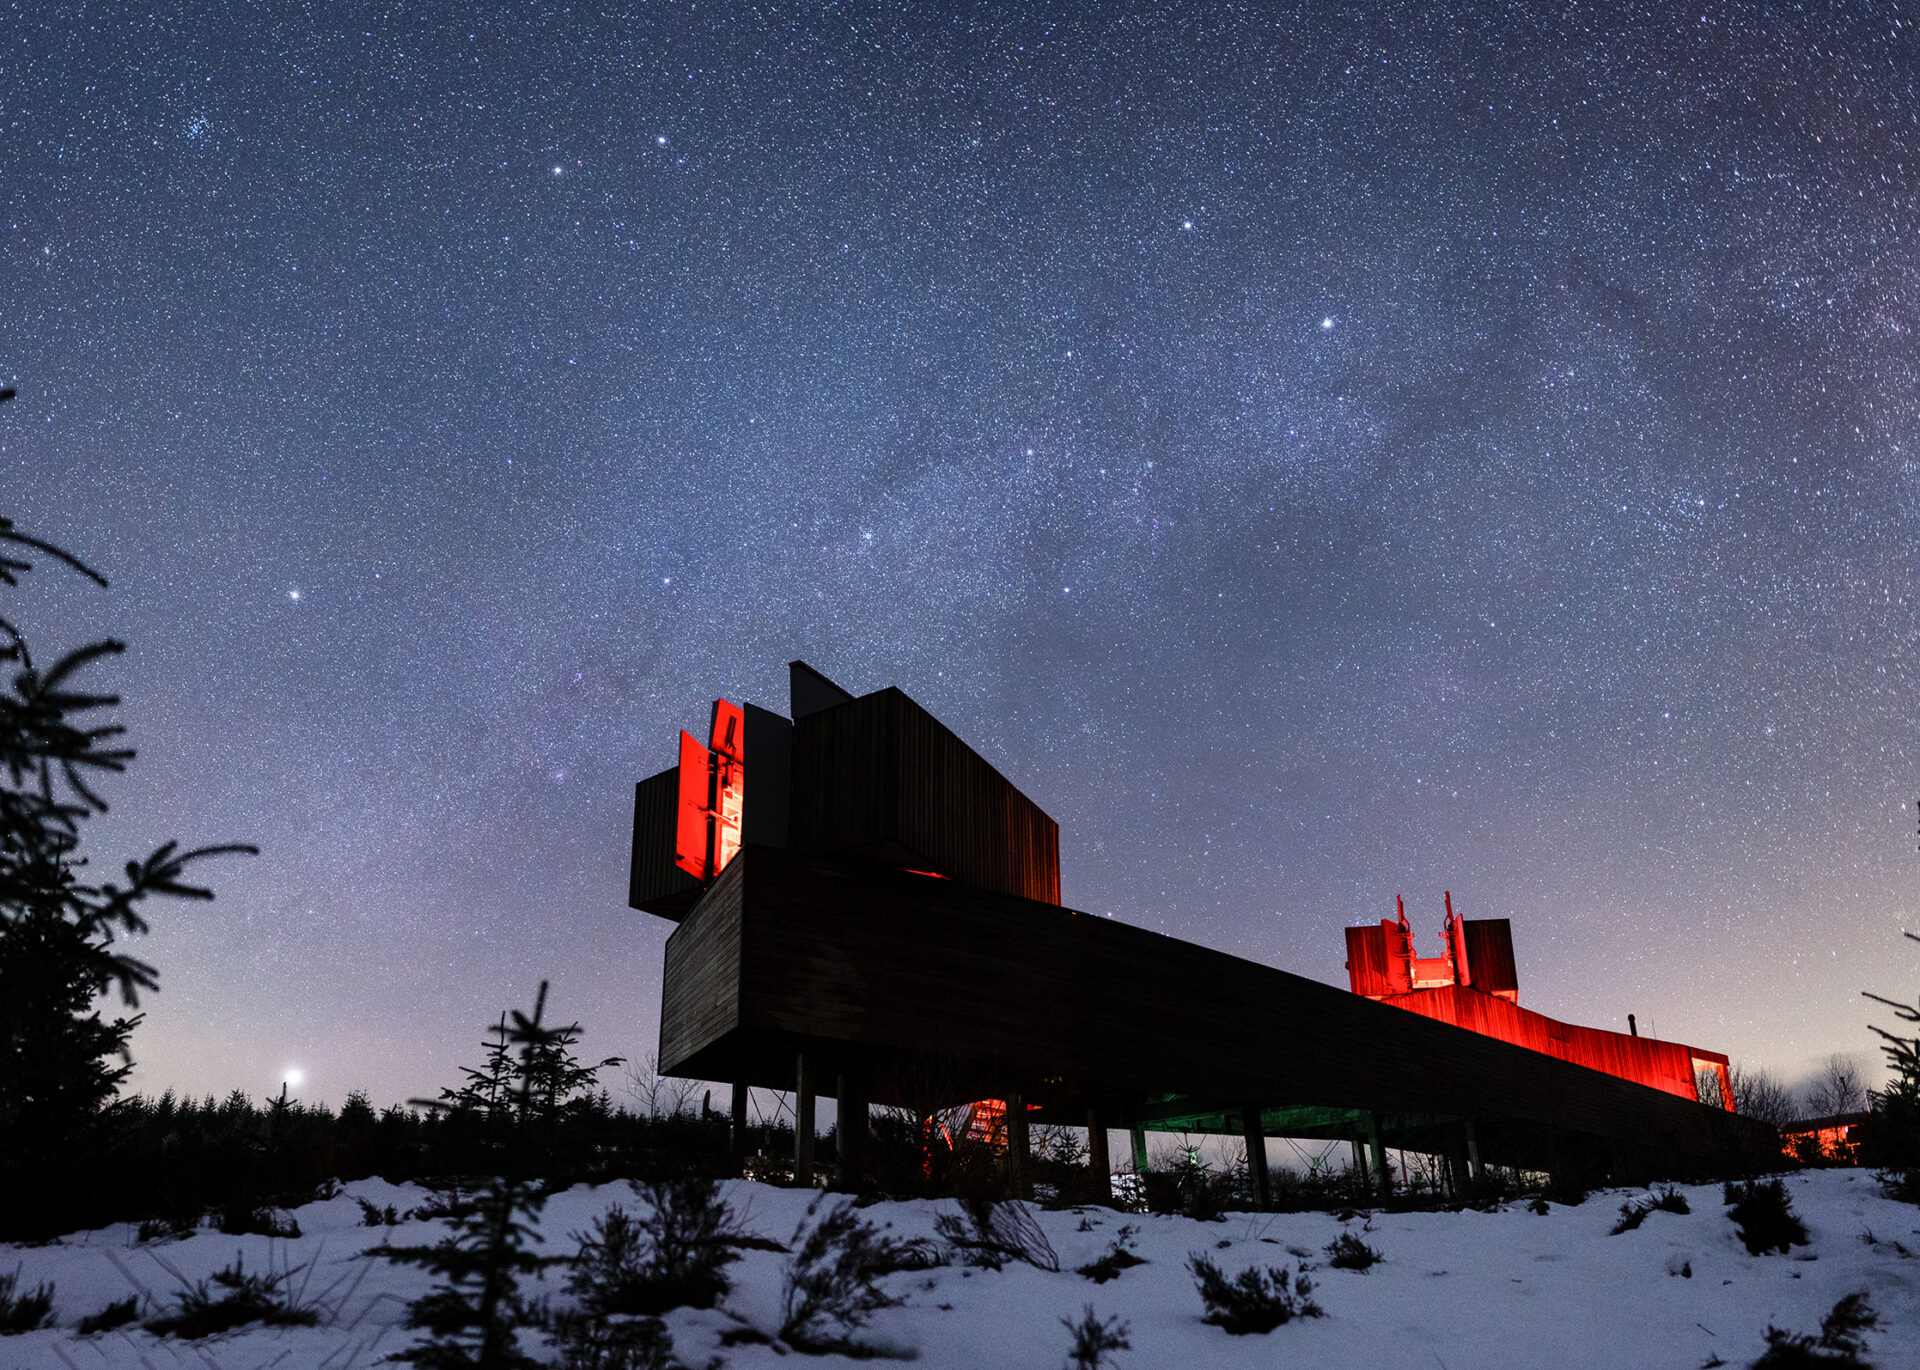 A long observatory stands in a snow covered field. Red lights illuminate it. The sky above is full of stars.